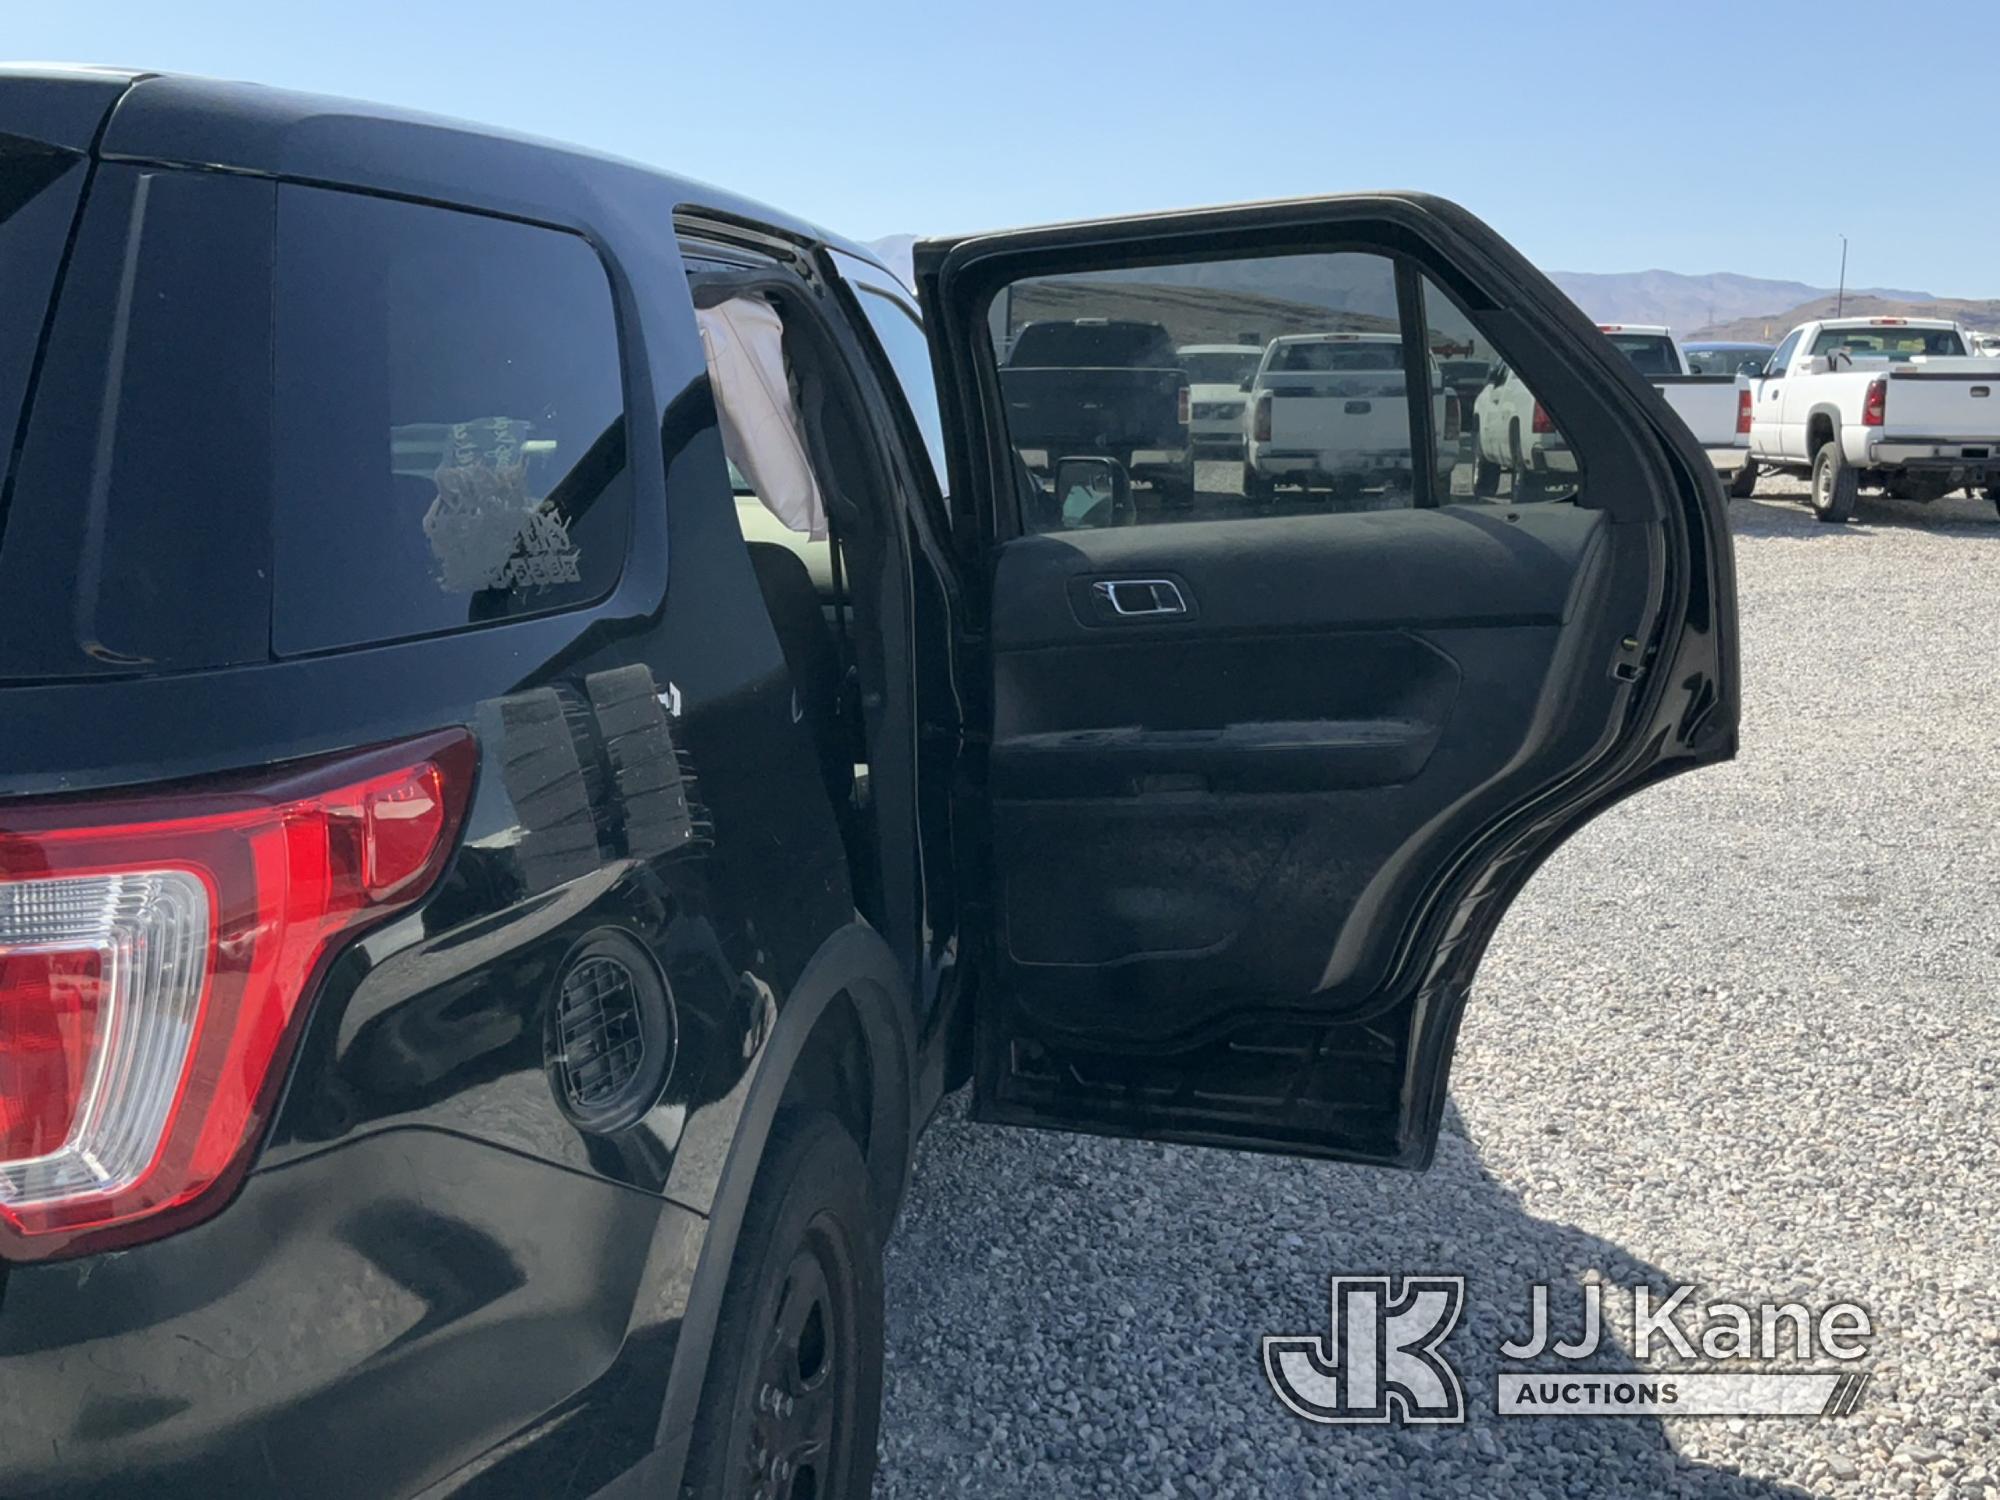 (Las Vegas, NV) 2018 Ford Explorer AWD Police Interceptor Dealers Only, Towed In, Body Damage, Odome